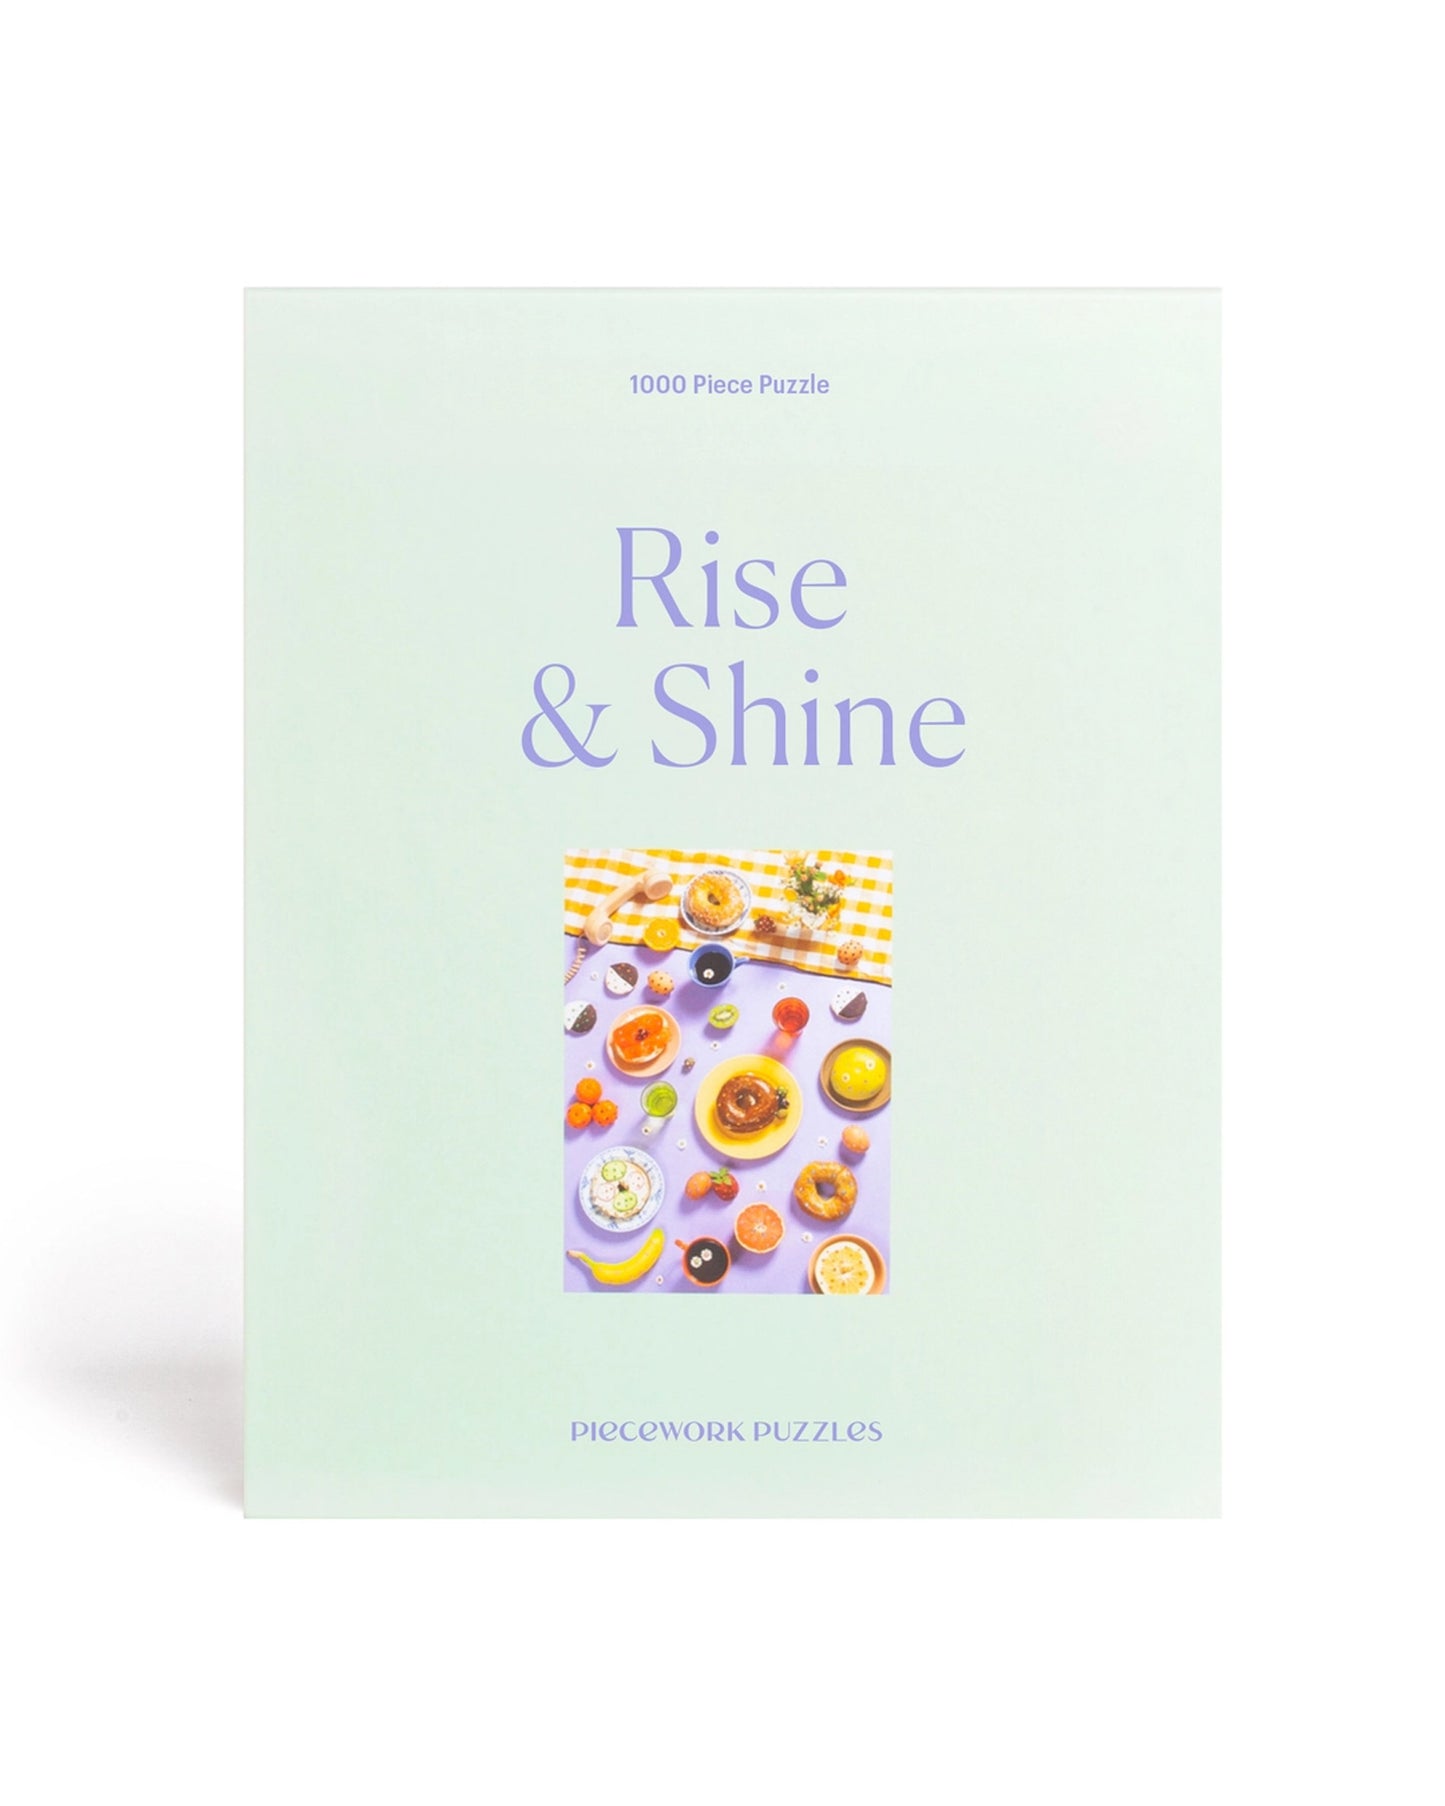 PIECEWORK 1000 Piece Puzzle in Rise and Shine available at Lahn.shop